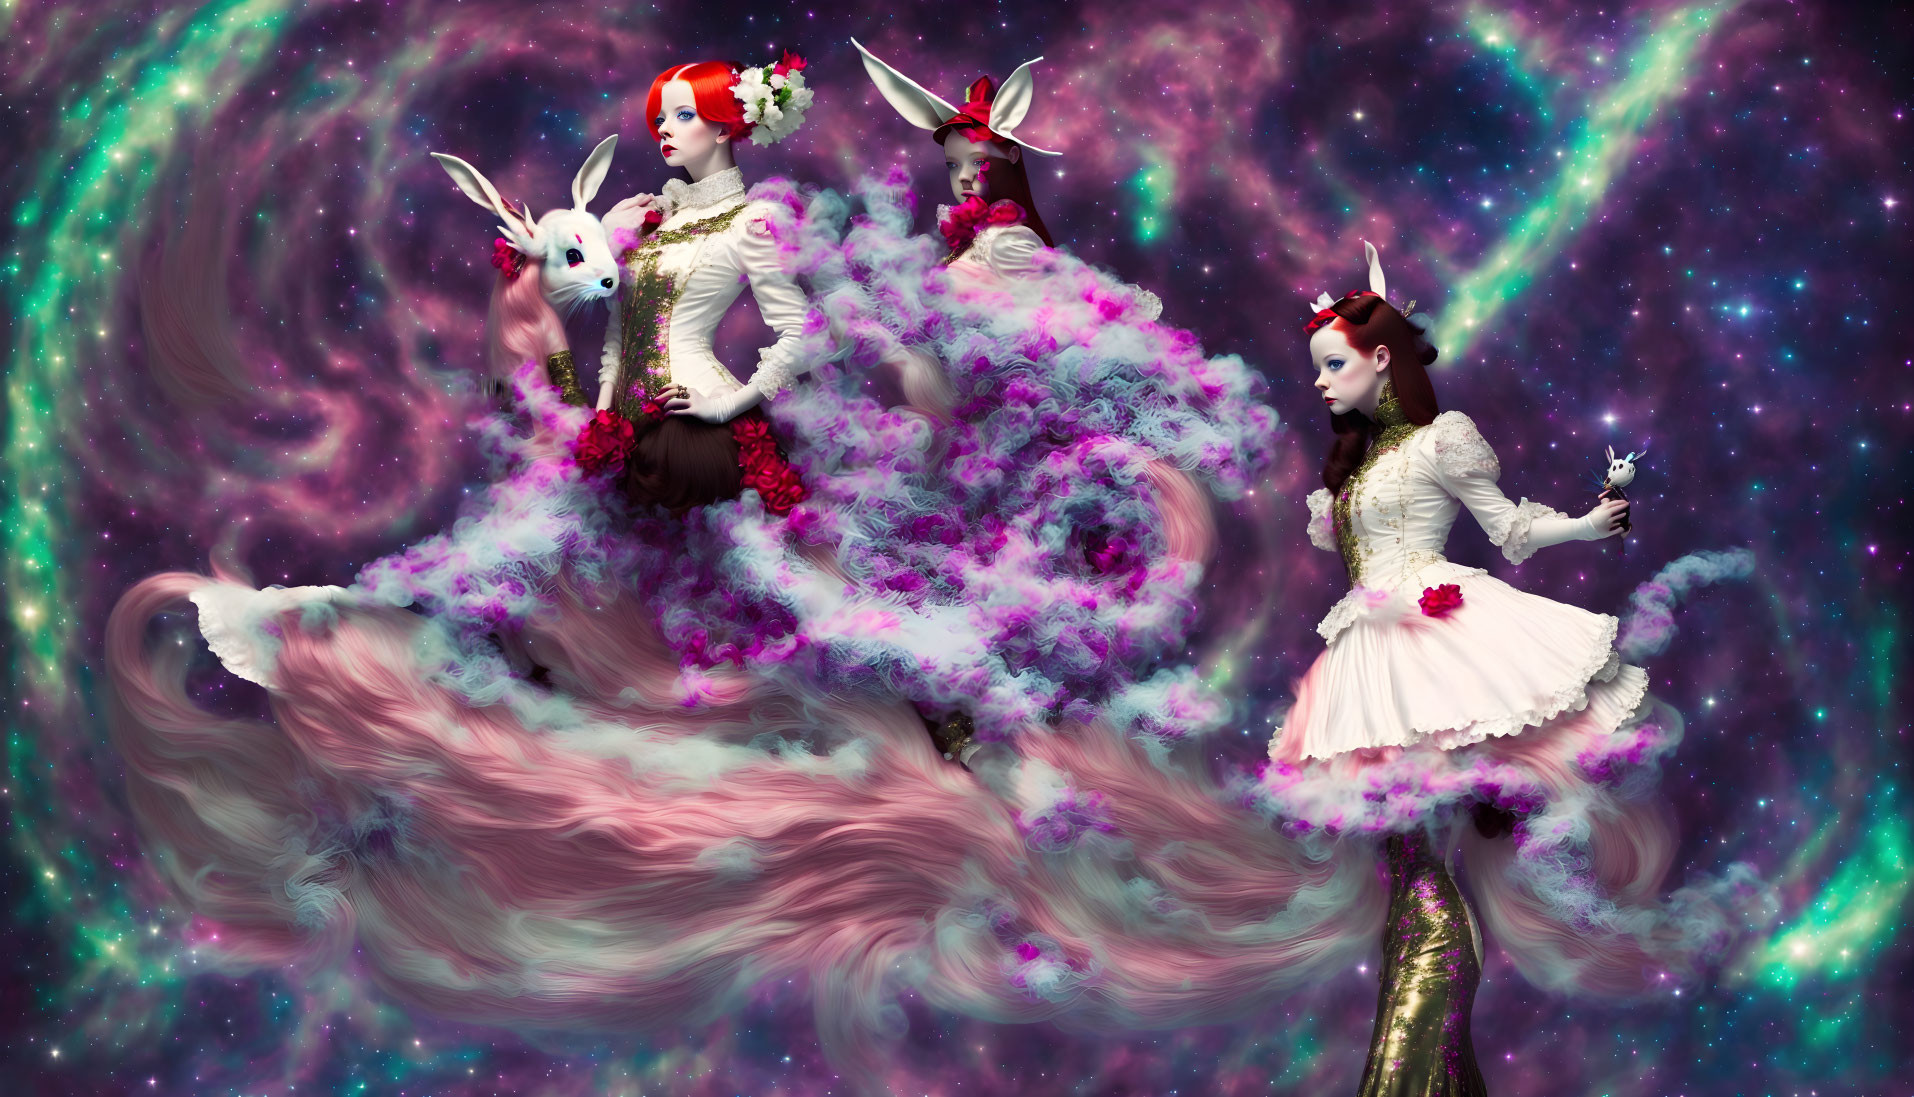 Fantasy figures with rabbit ears in cosmic nebulae and historical dresses.